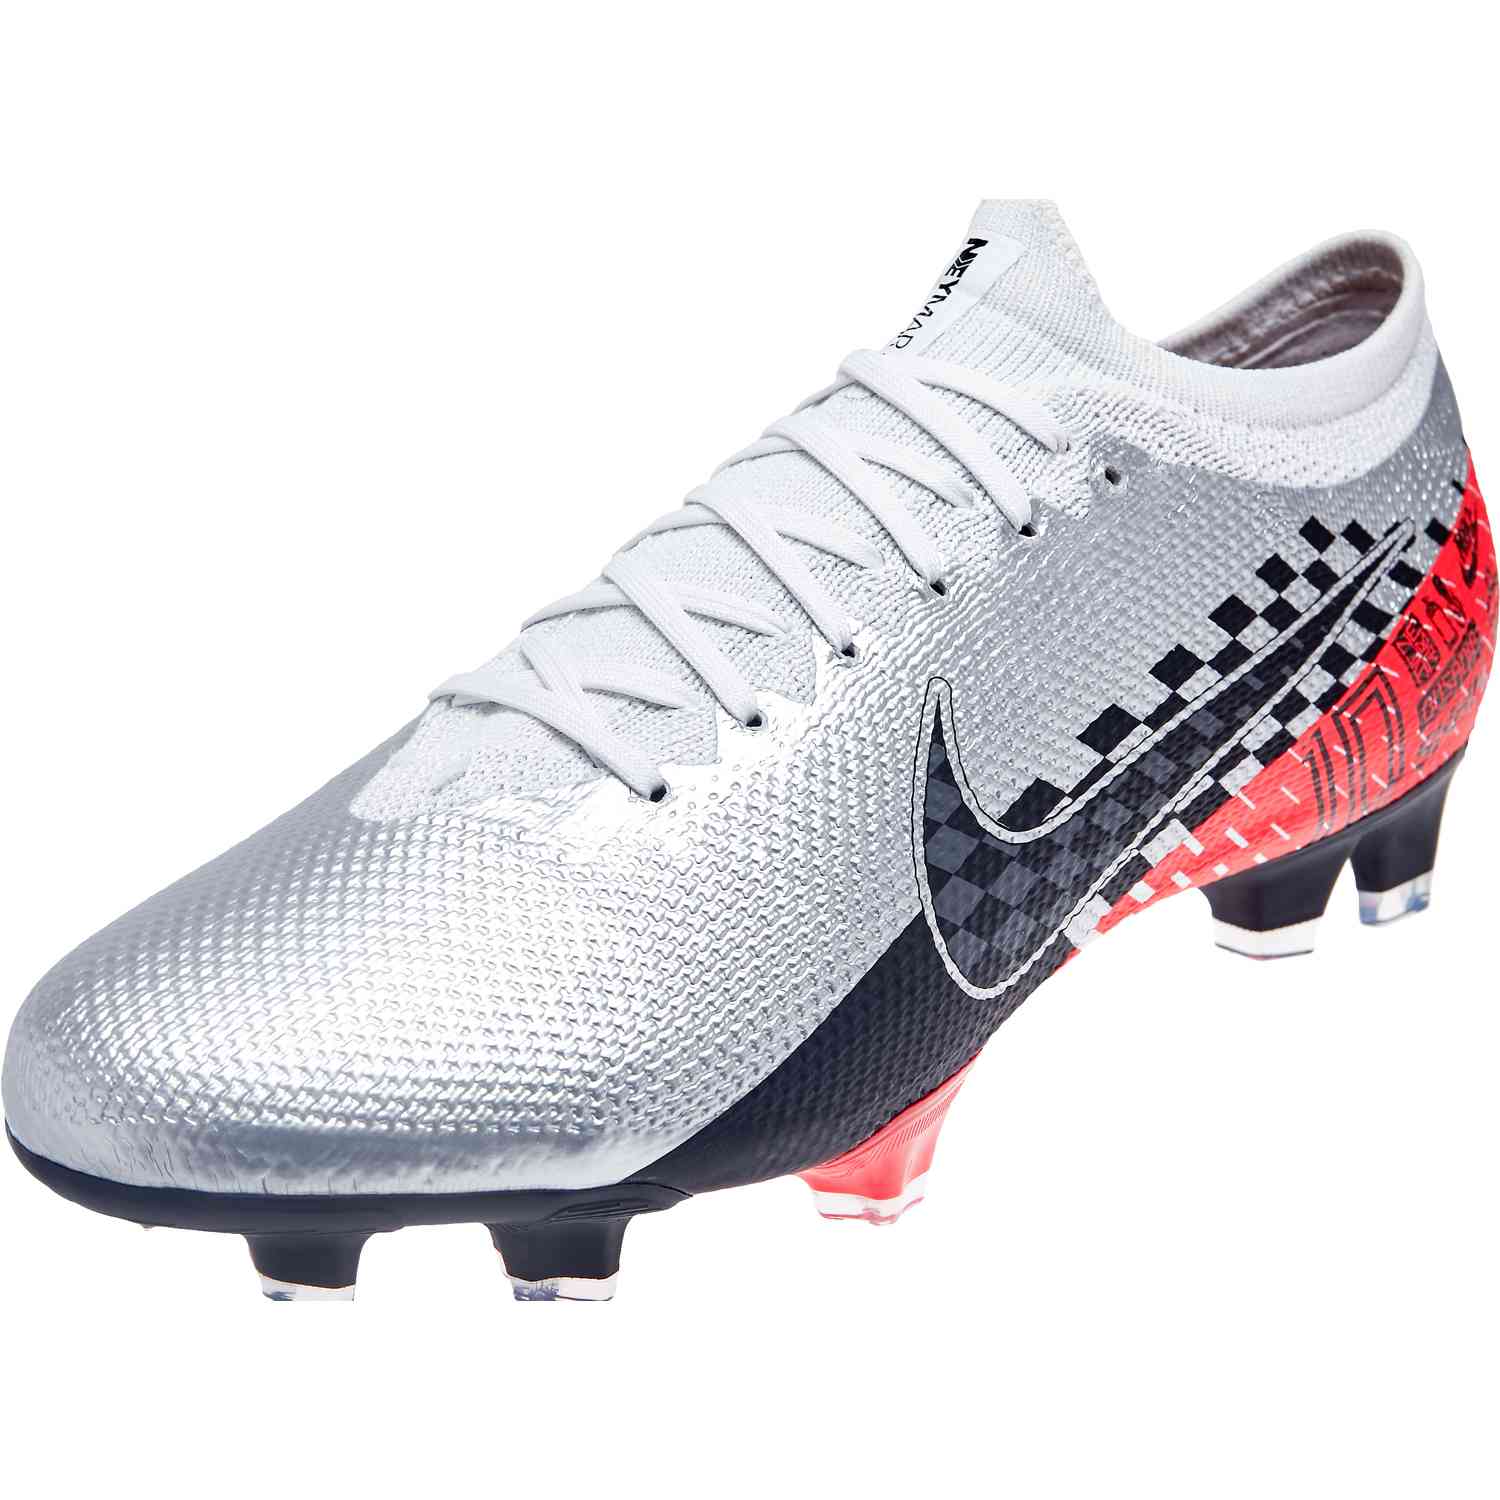 Nike Mercurial Soccer Cleats & Soccer Shoes Best Price